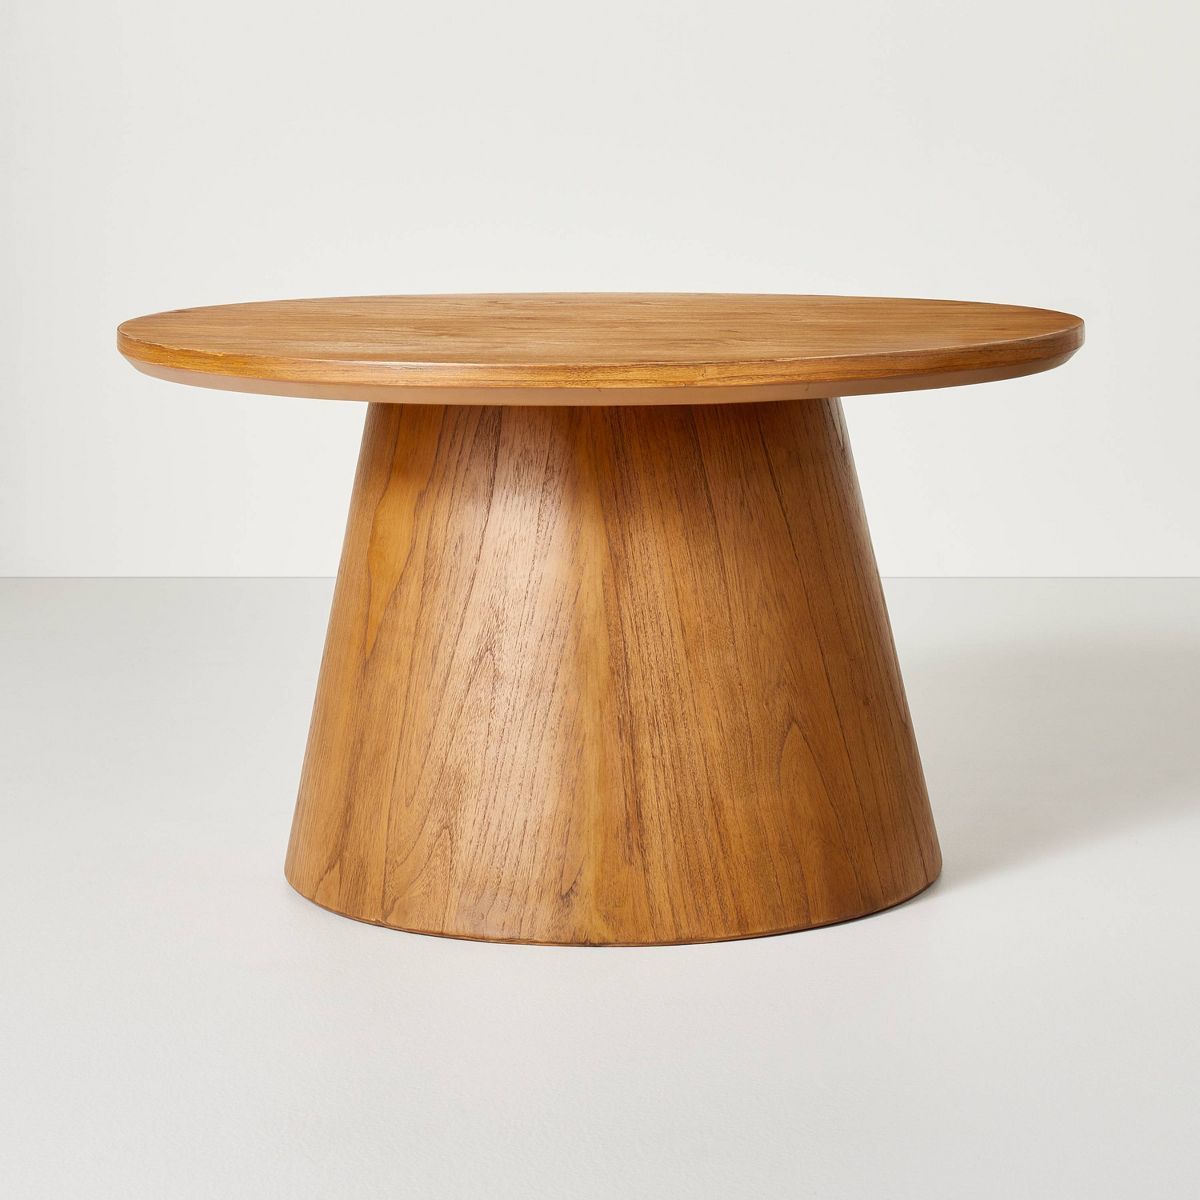 Wooden Round Pedestal Coffee Table - Aged Oak - Hearth & Hand™ with Magnolia | Target